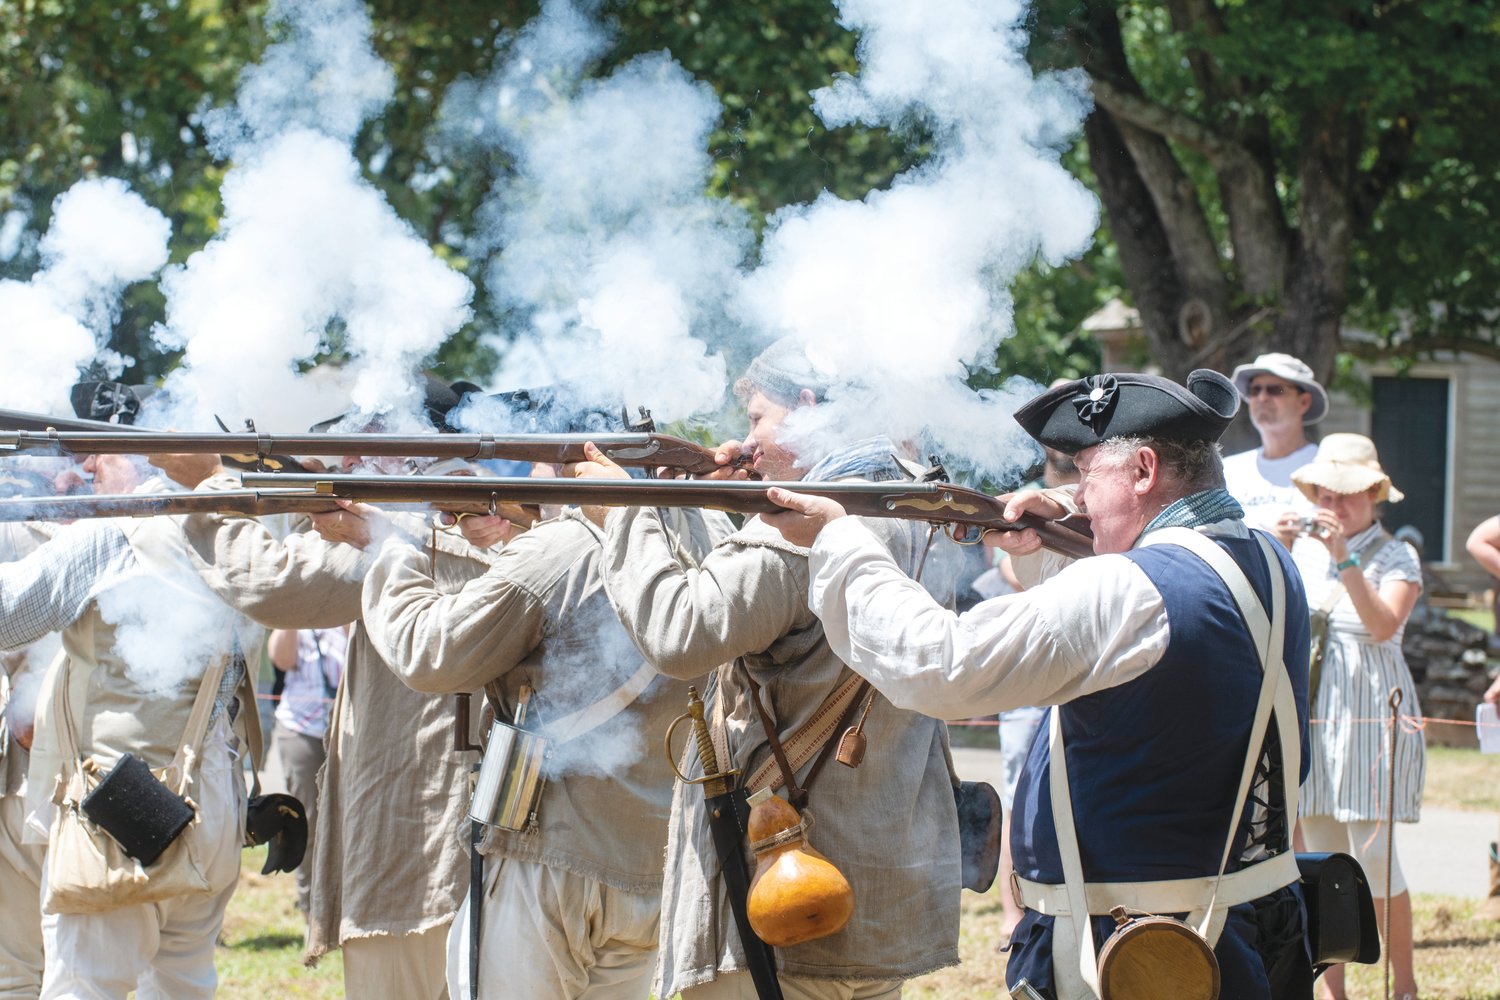 Smoke from musket powder billows as reenactors fire during Saturday's battle at the House in the Horseshoe.